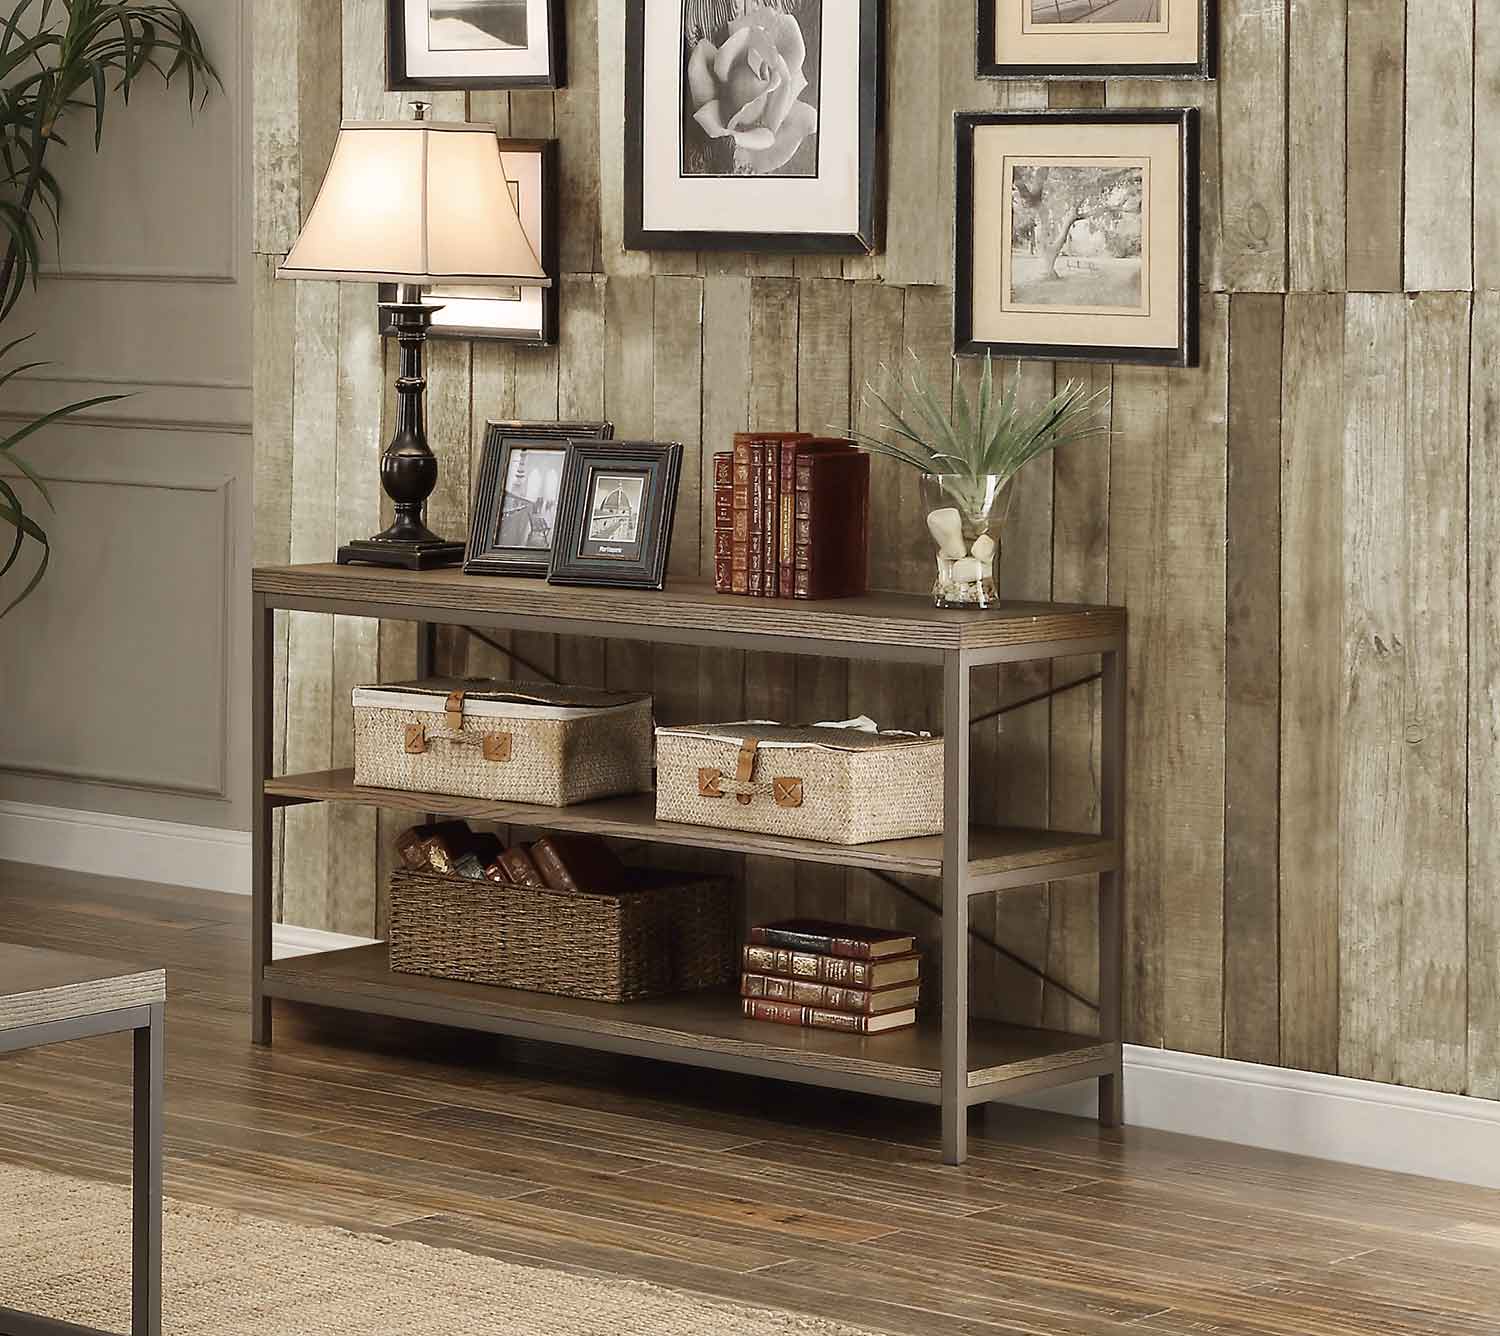 Homelegance Daria Sofa Table/TV Stand - Weathered Wood Table Top with Metal Framing